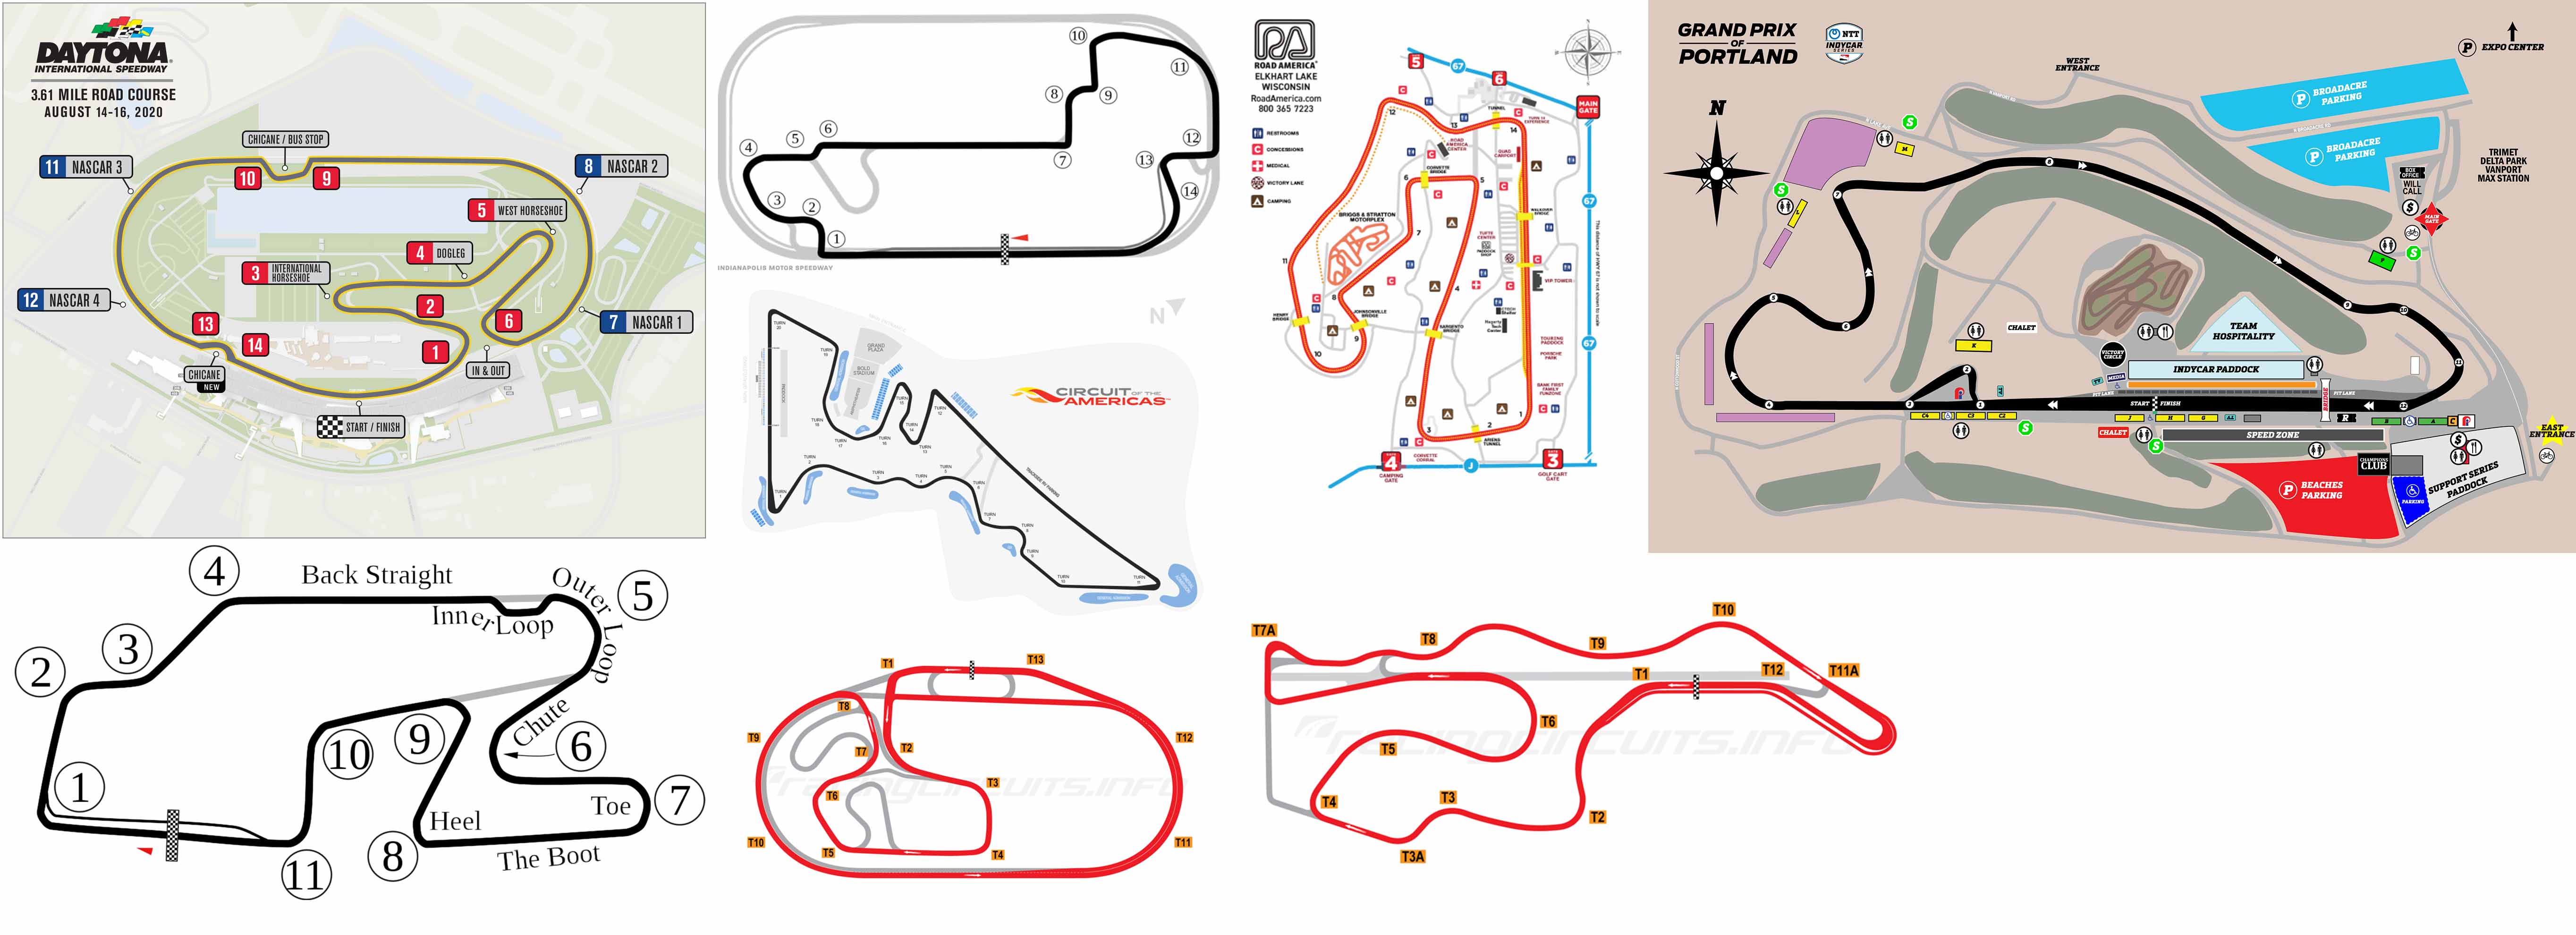 4141dis-road-course-map.jpg